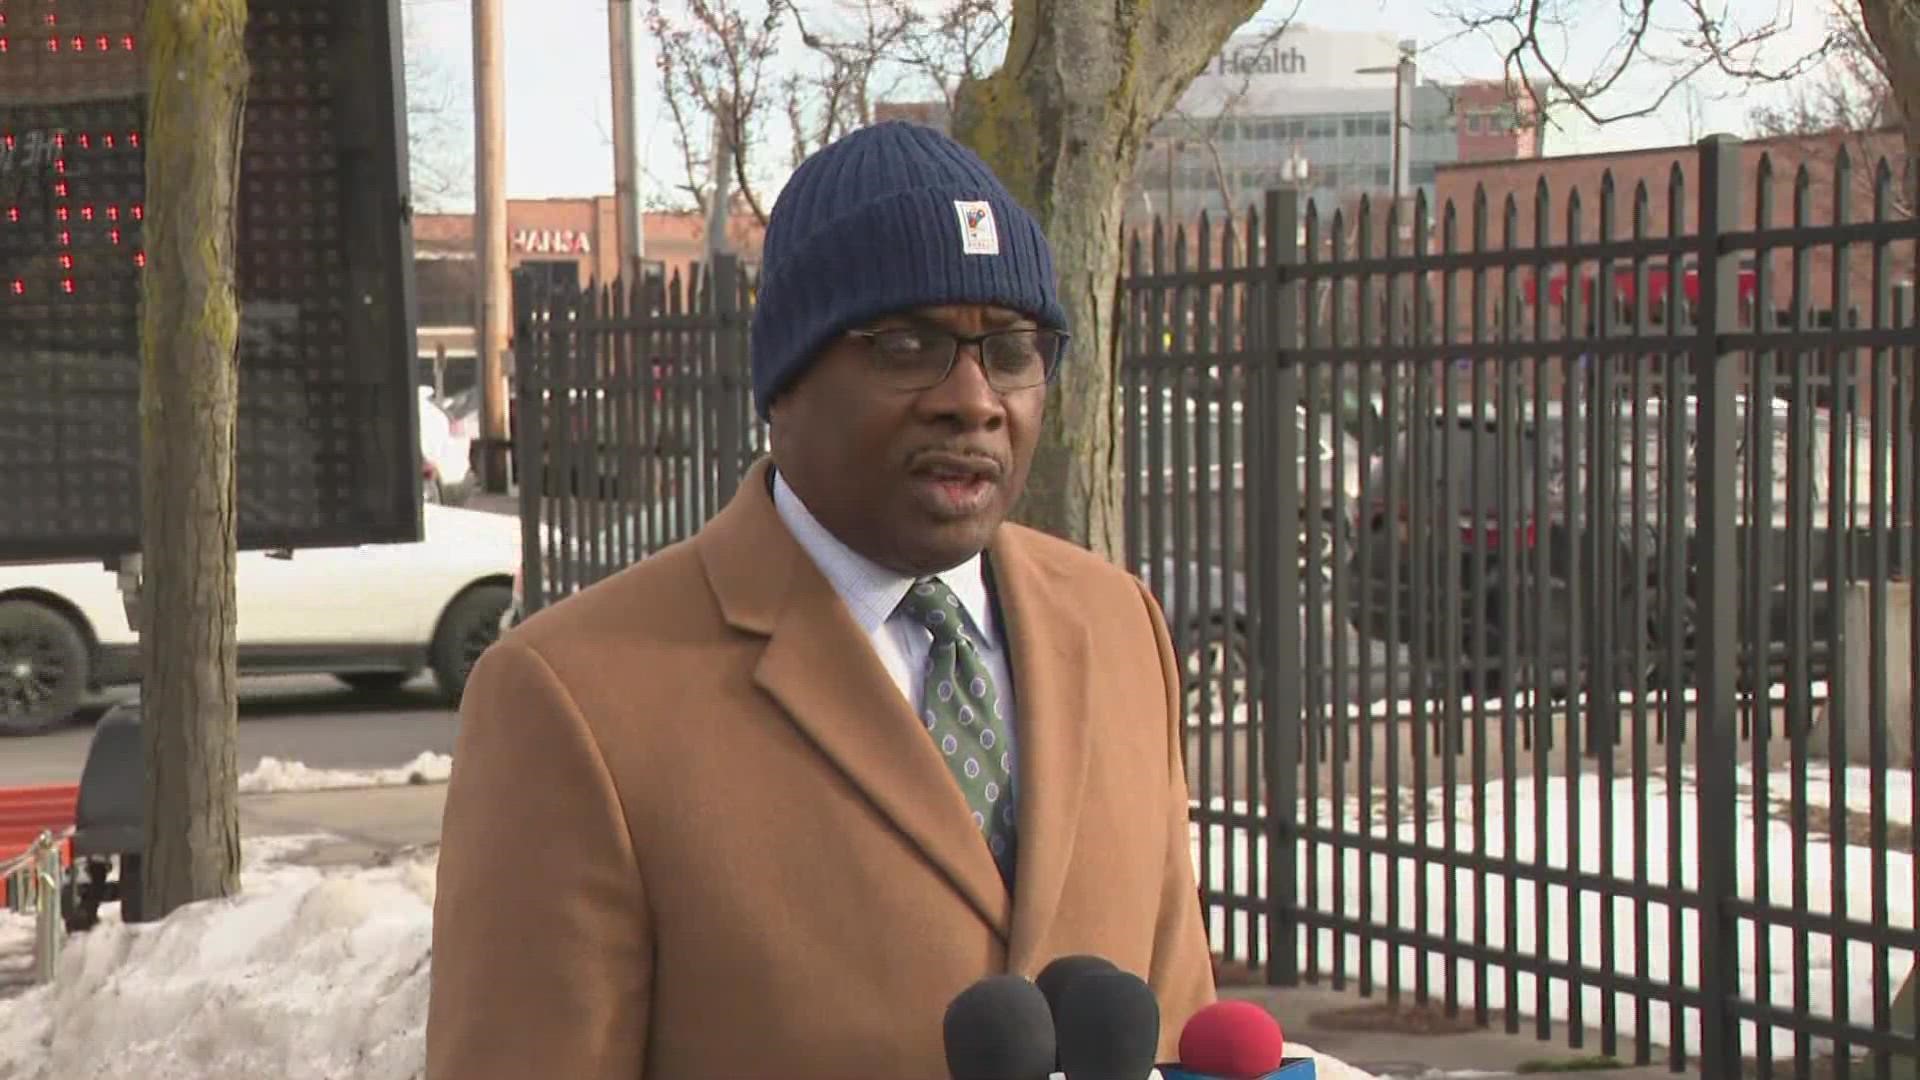 Buffalo Mayor Byron Brown discusses preparation for cold weather